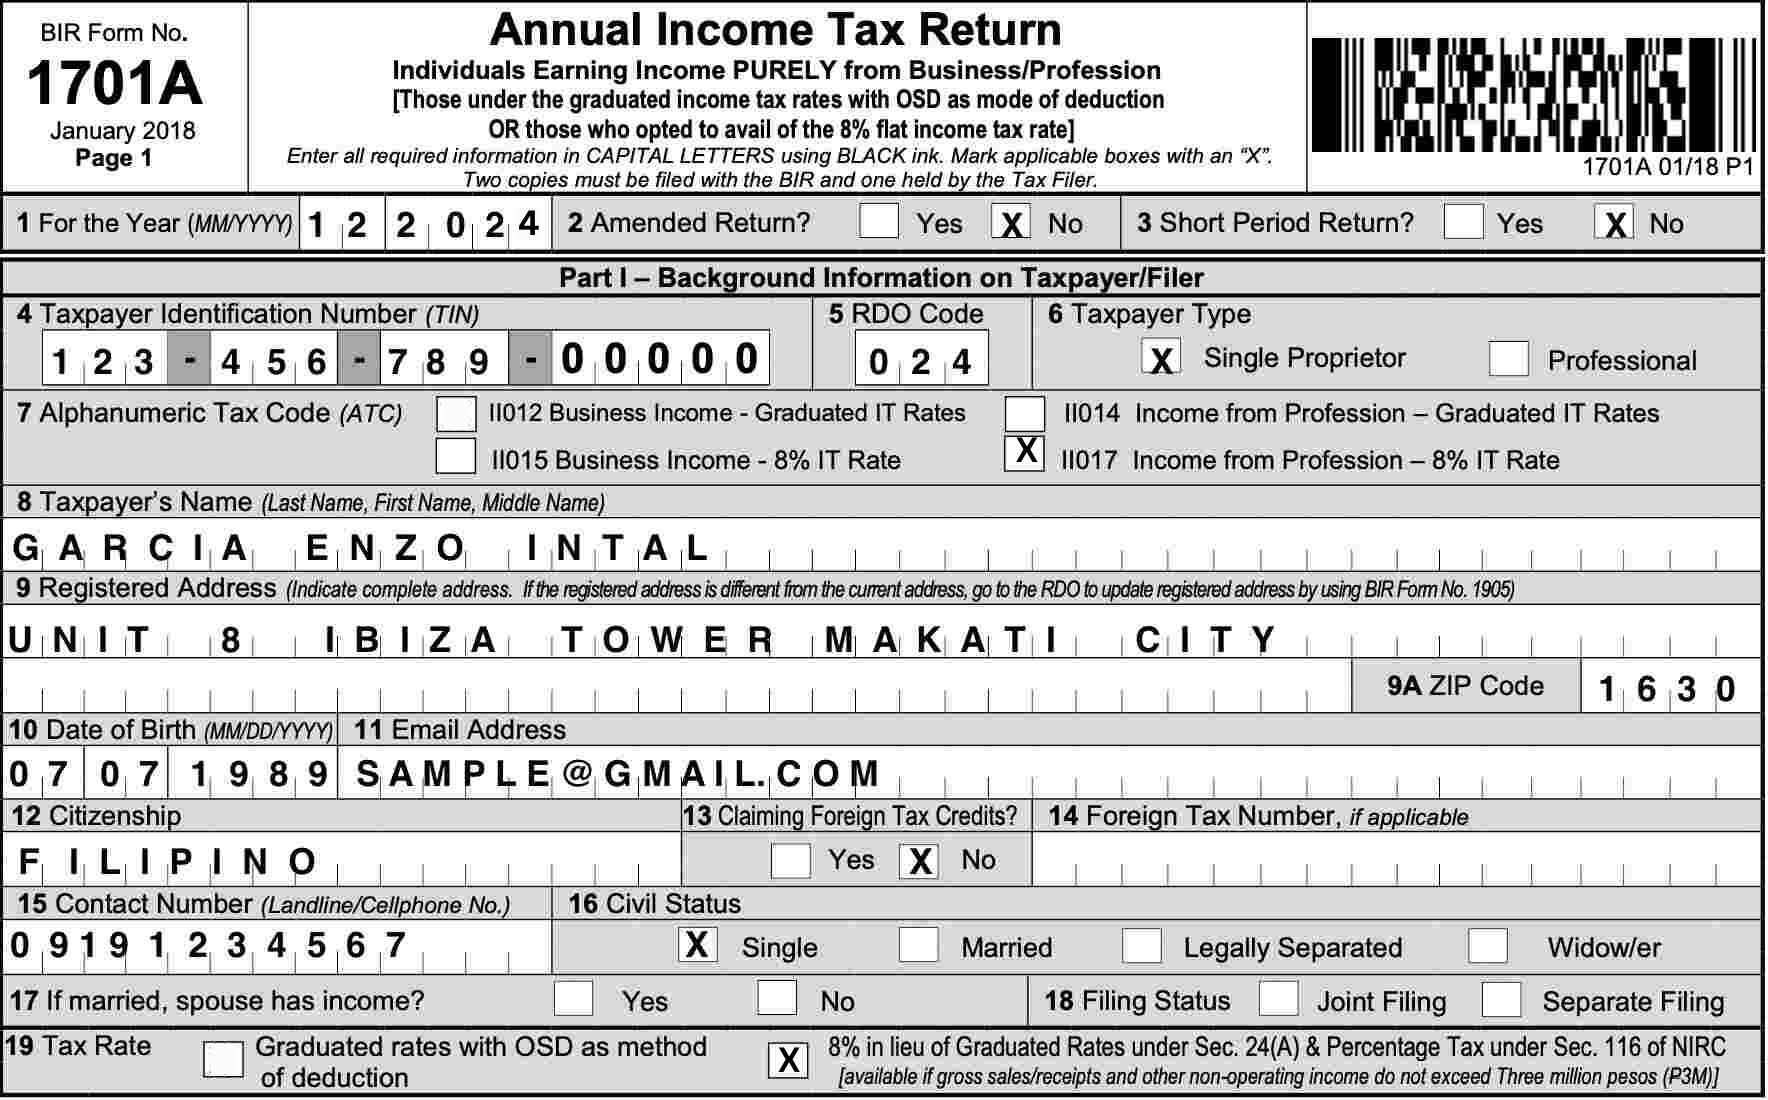 how to compute income tax 1701a for professional taxpayers in the philippines